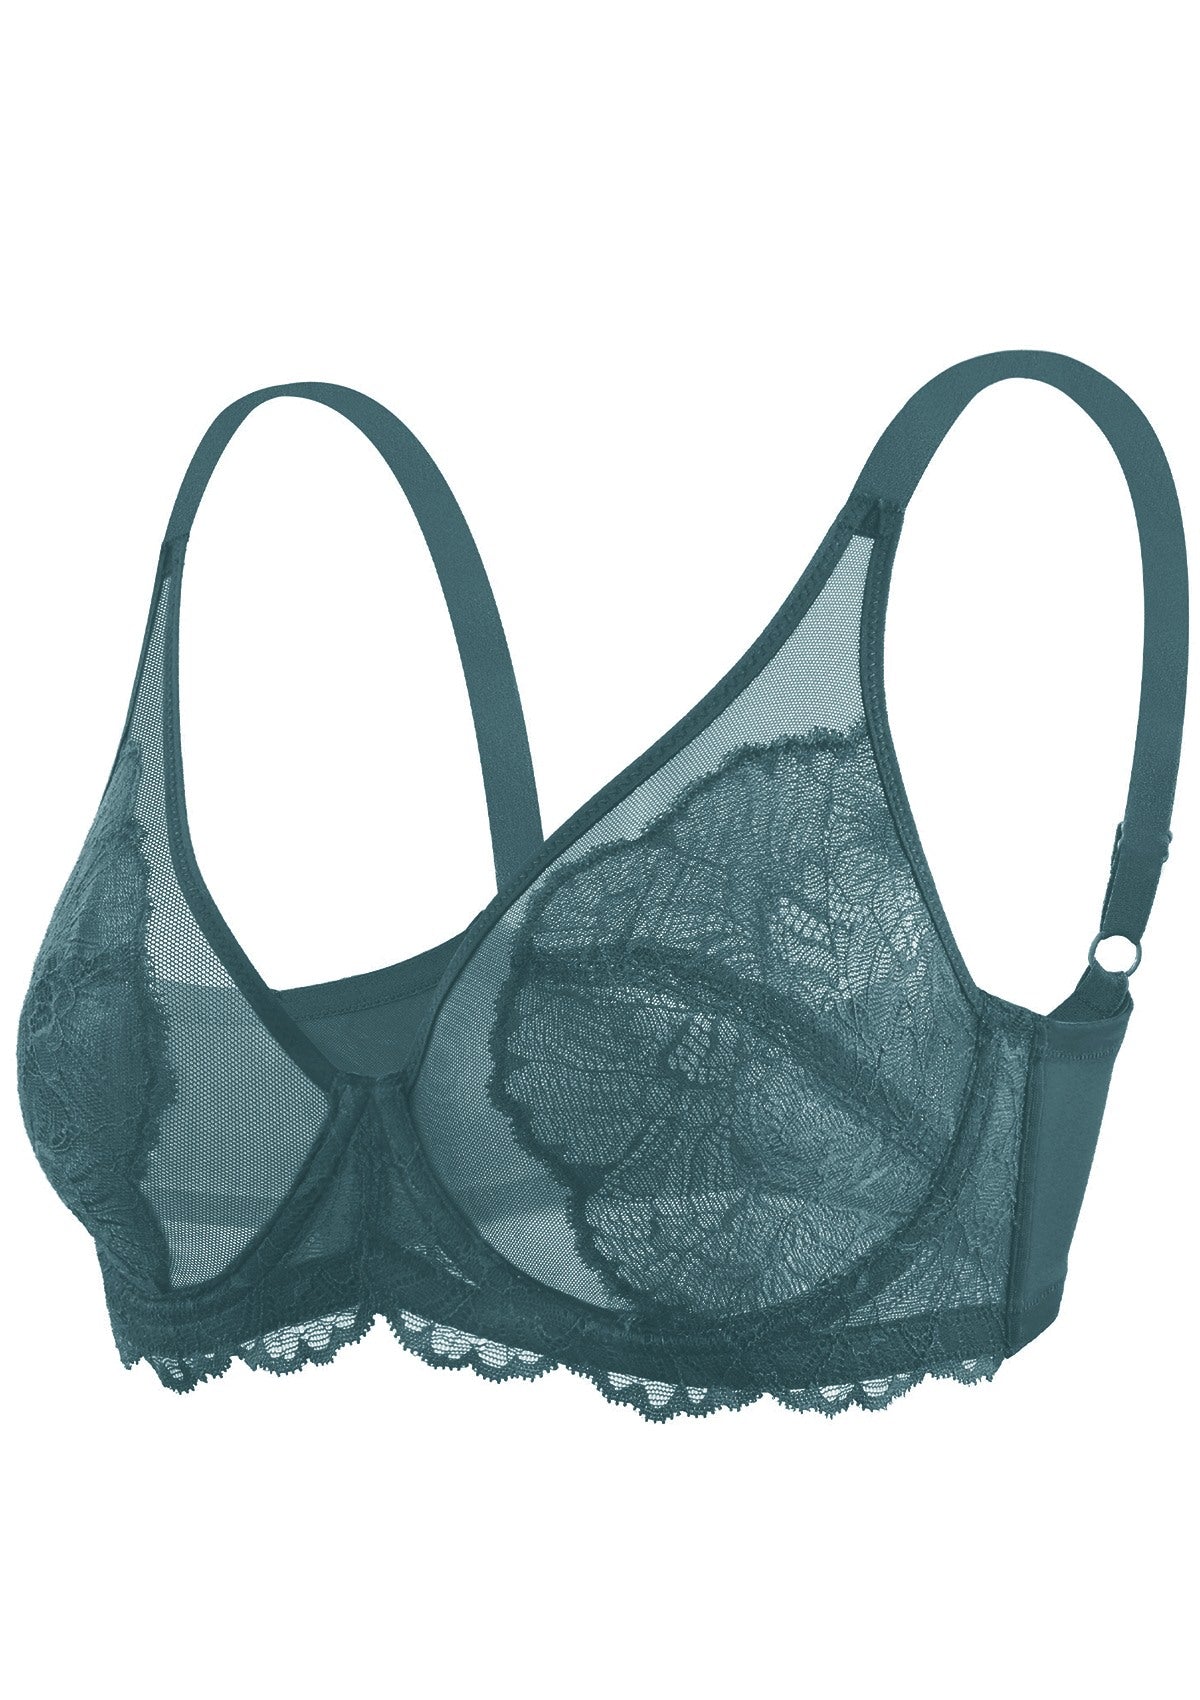 HSIA Blossom Full Figure See-Through Lace Bra For Side And Back Fat - Biscay Blue / 40 / D